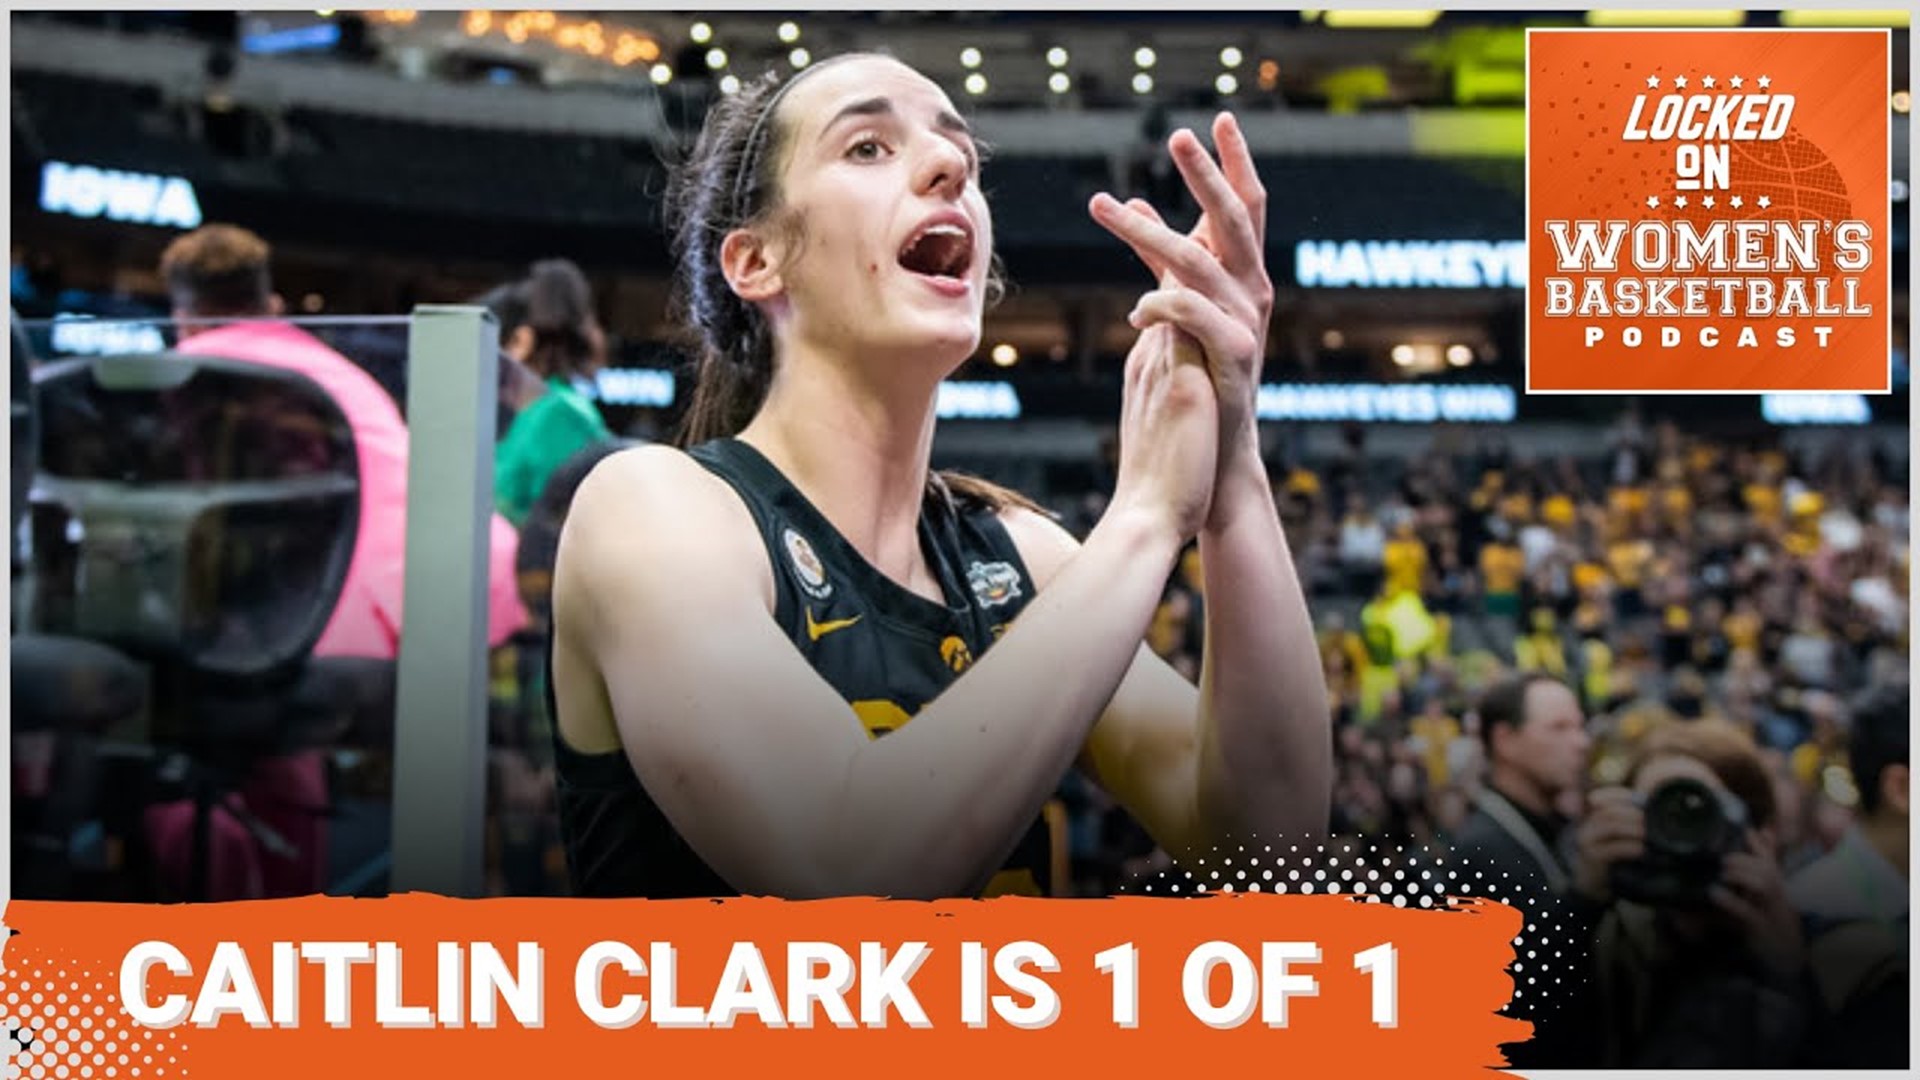 Iowa's Caitlin Clark is the best offensive prospect in the history of women's basketball, scoring 41 points against then-undefeated South Carolina in the Final Four.